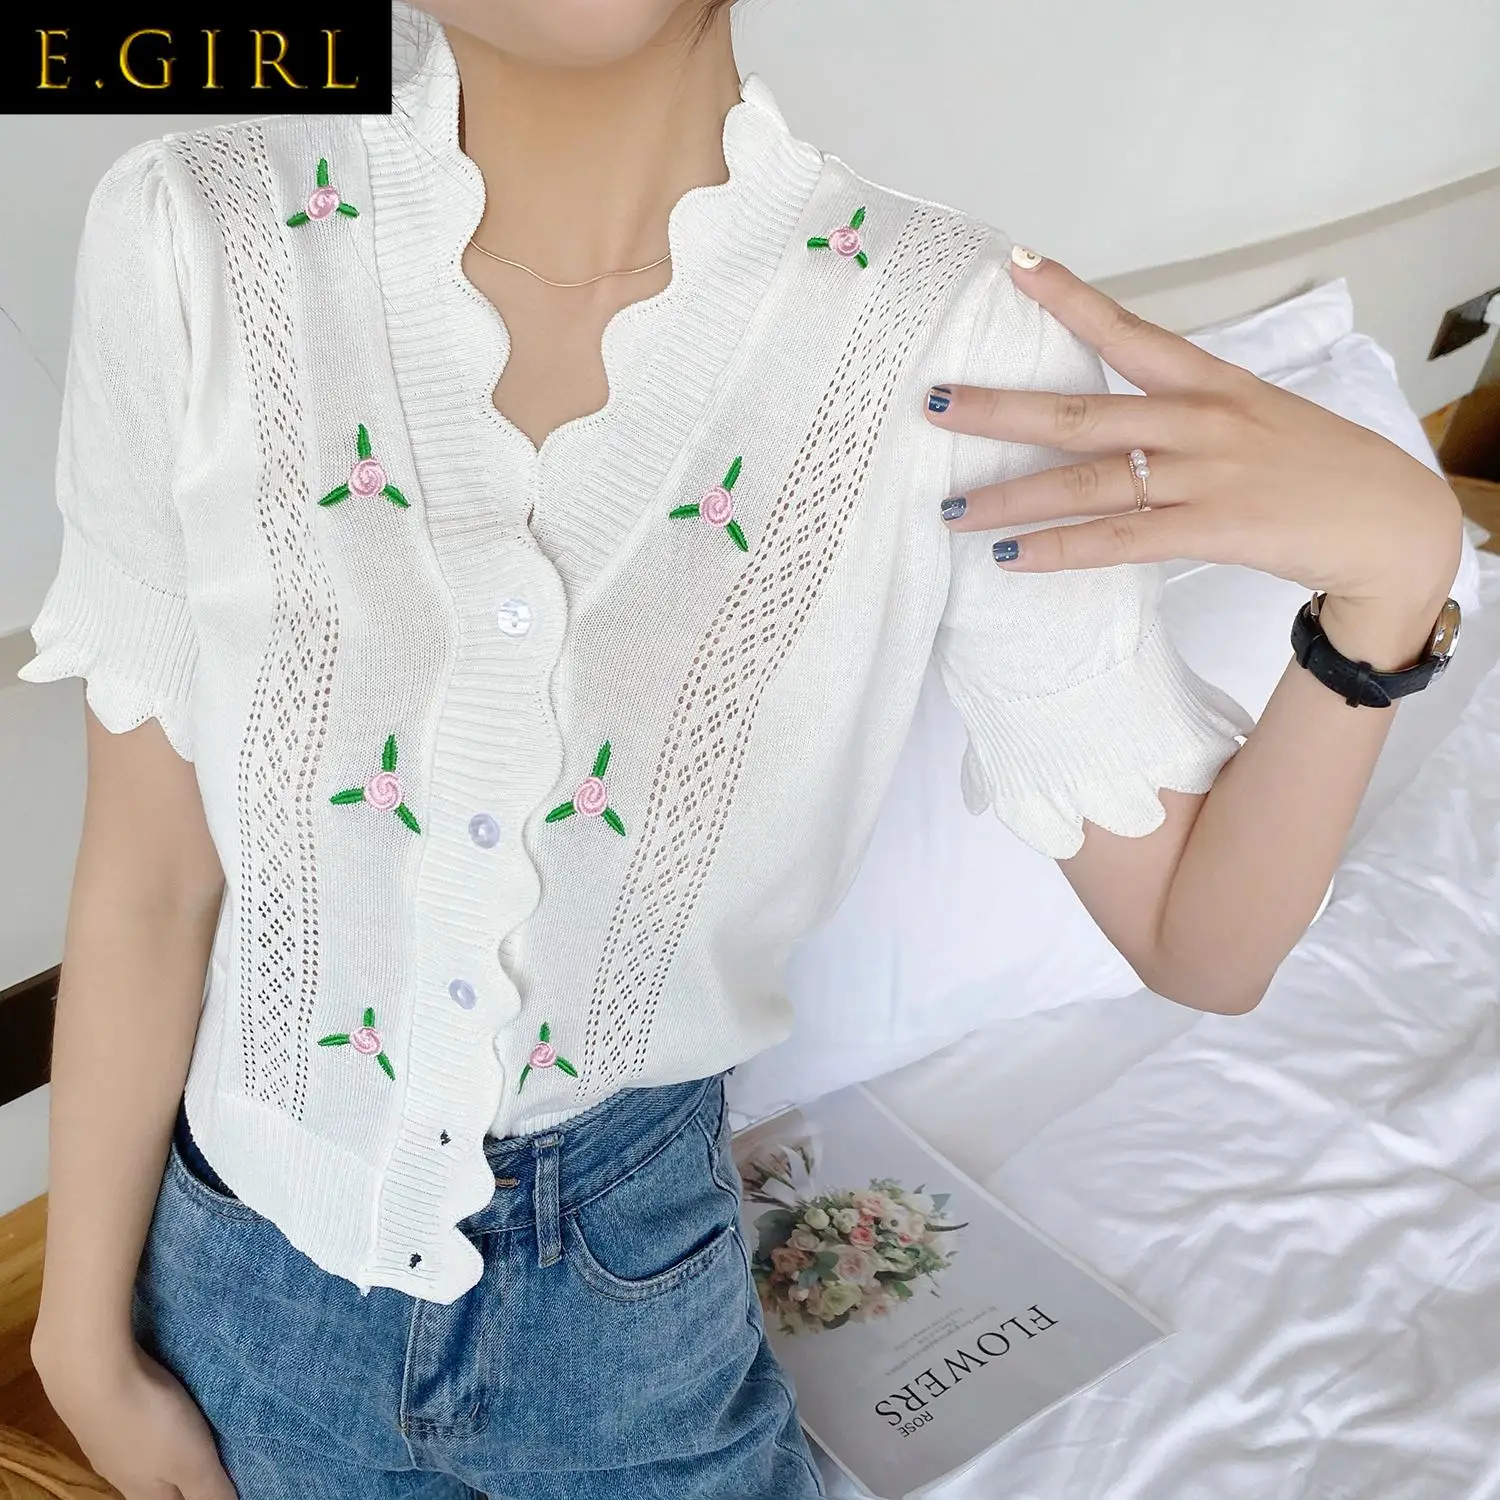 Make firm offers the new fashion show thin lace collar short sleeve short unlined upper garment to coat a T-shirt